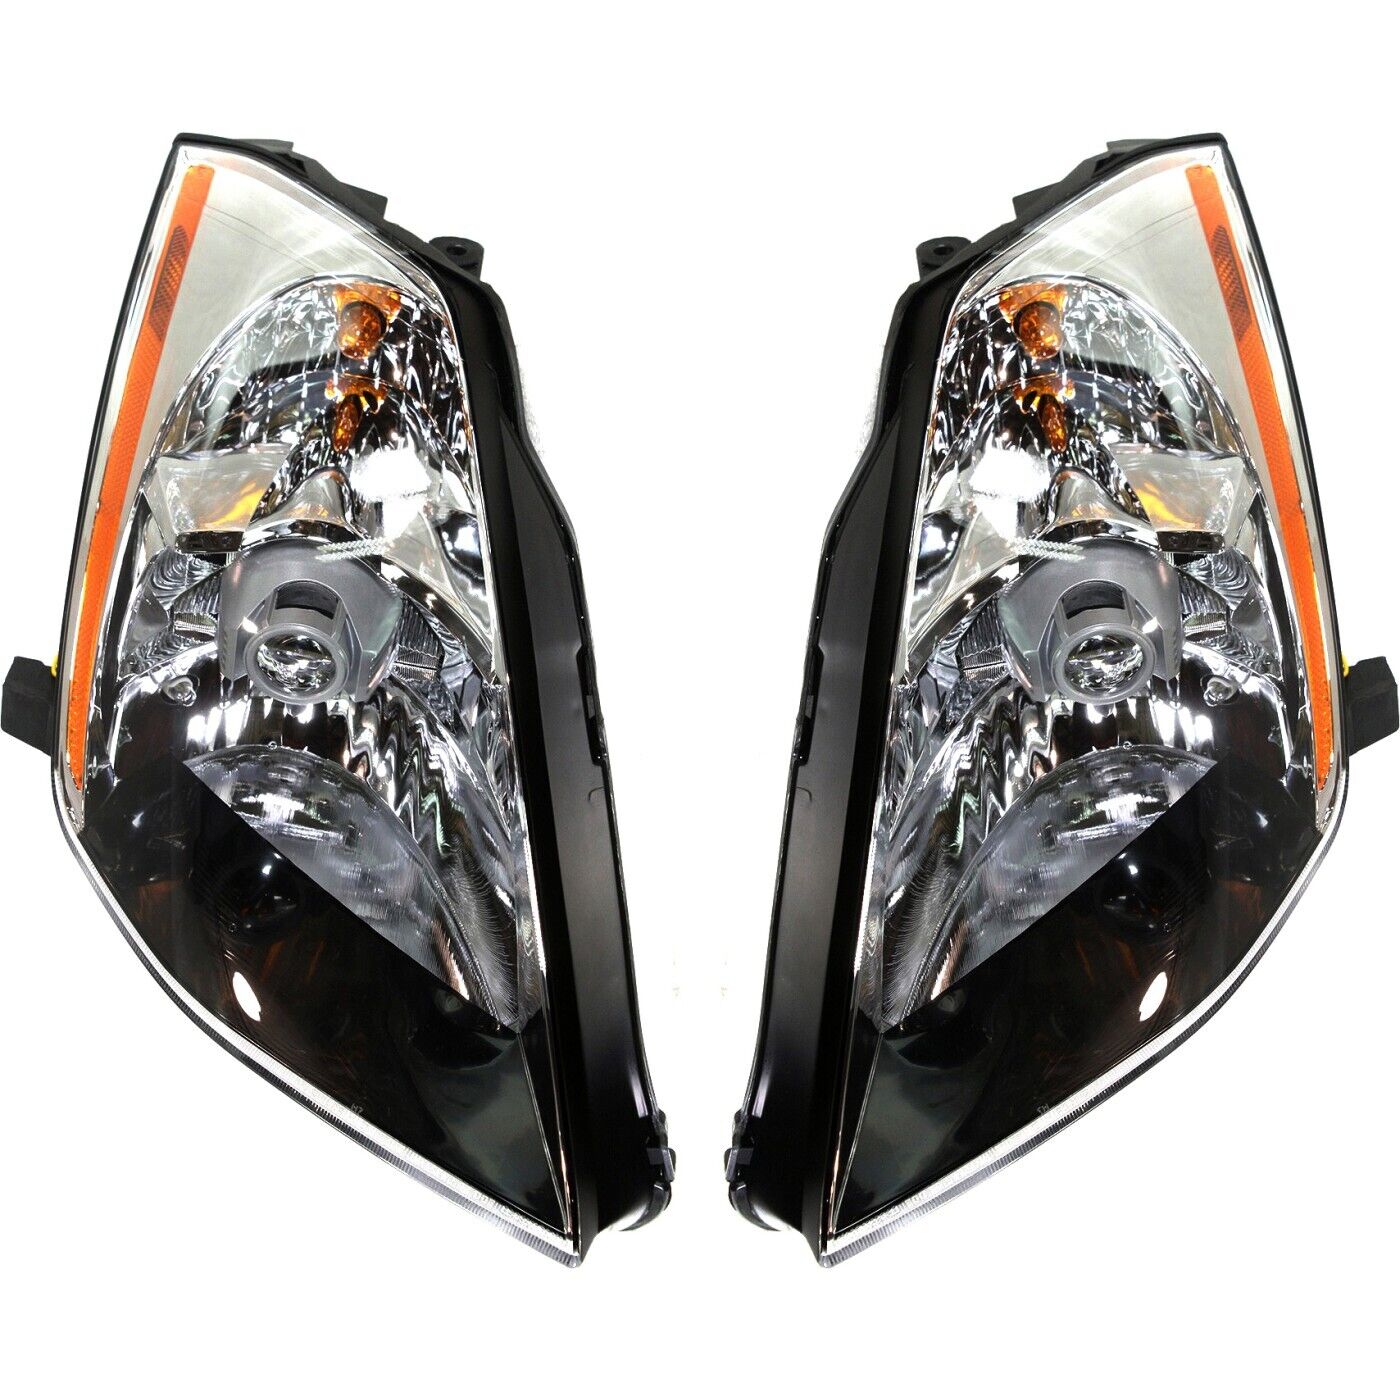 HID Xenon Headlights Headlamps Left & Right Lamp Pair Set for 03-05 Nissan 350Z